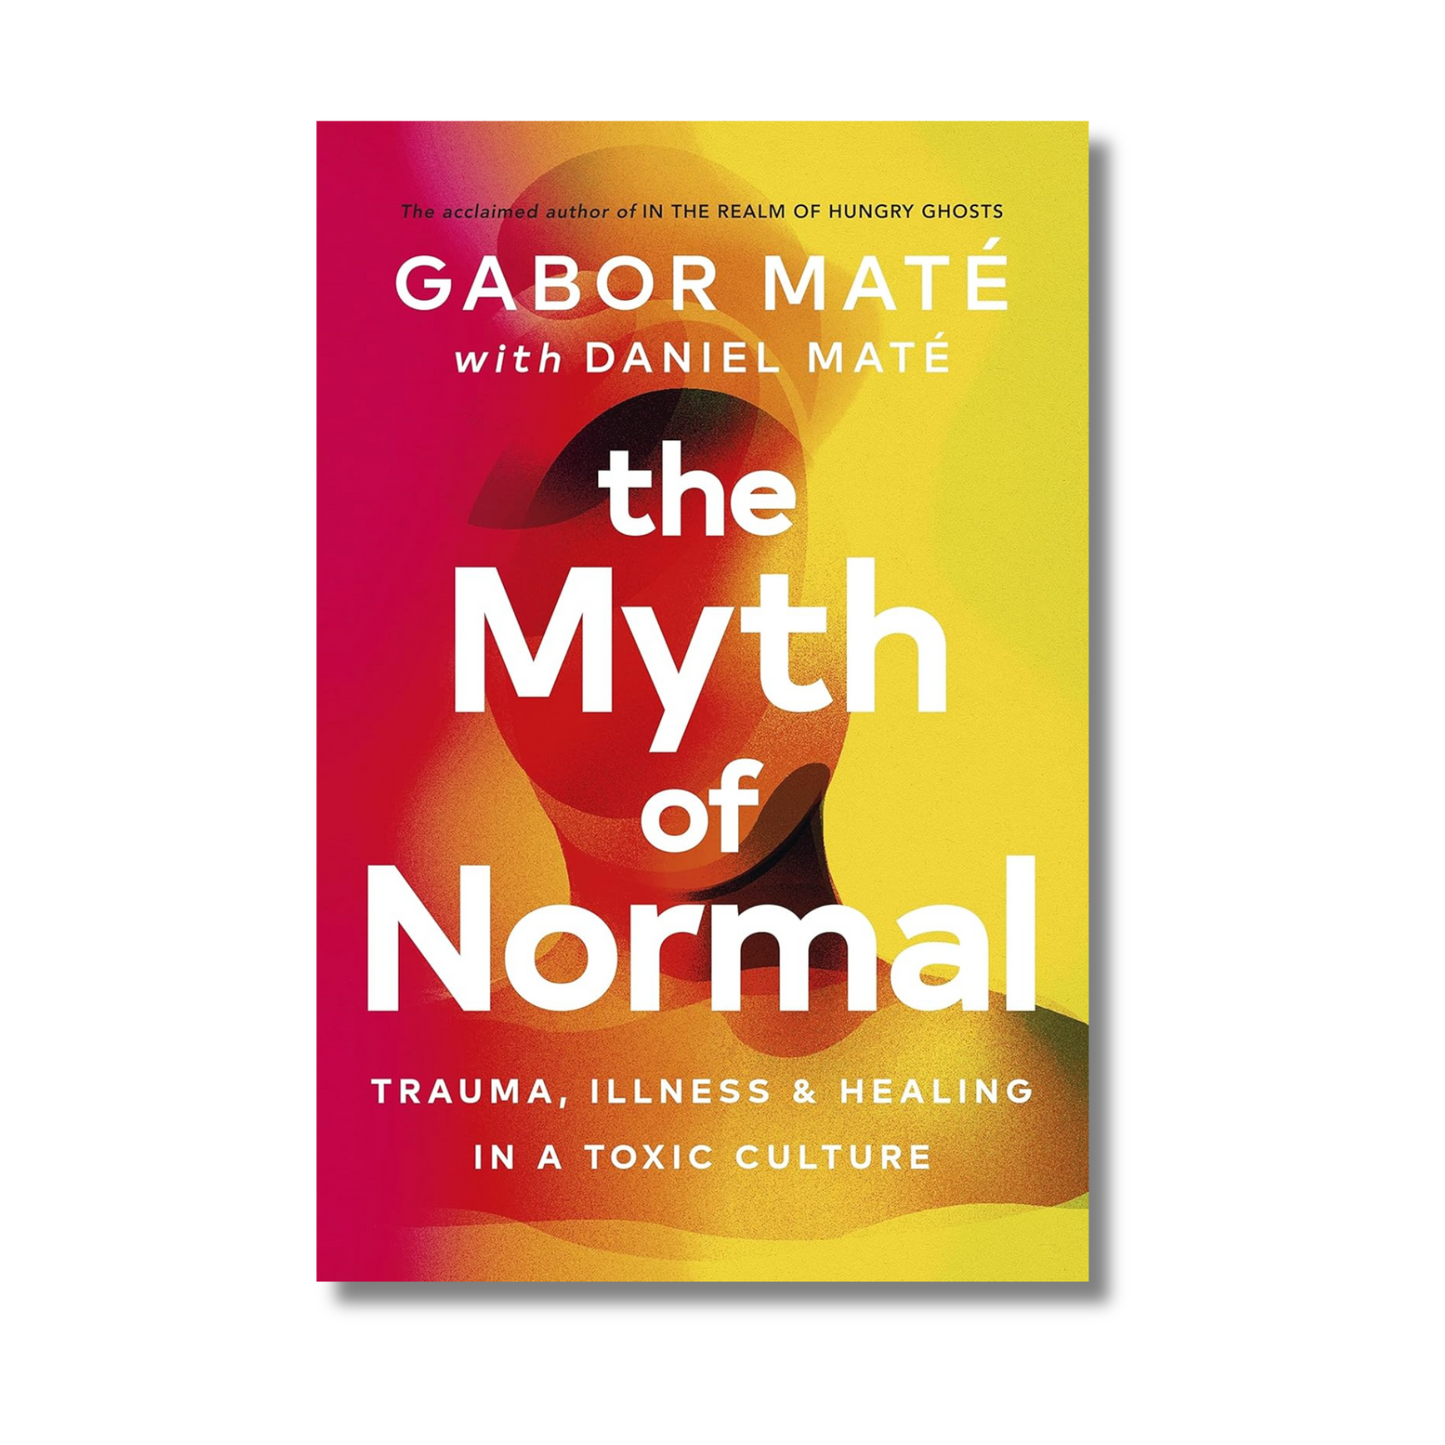 The Myth of Normal : Trauma, Illness & Healing in a Toxic Culture by Daniel Maté